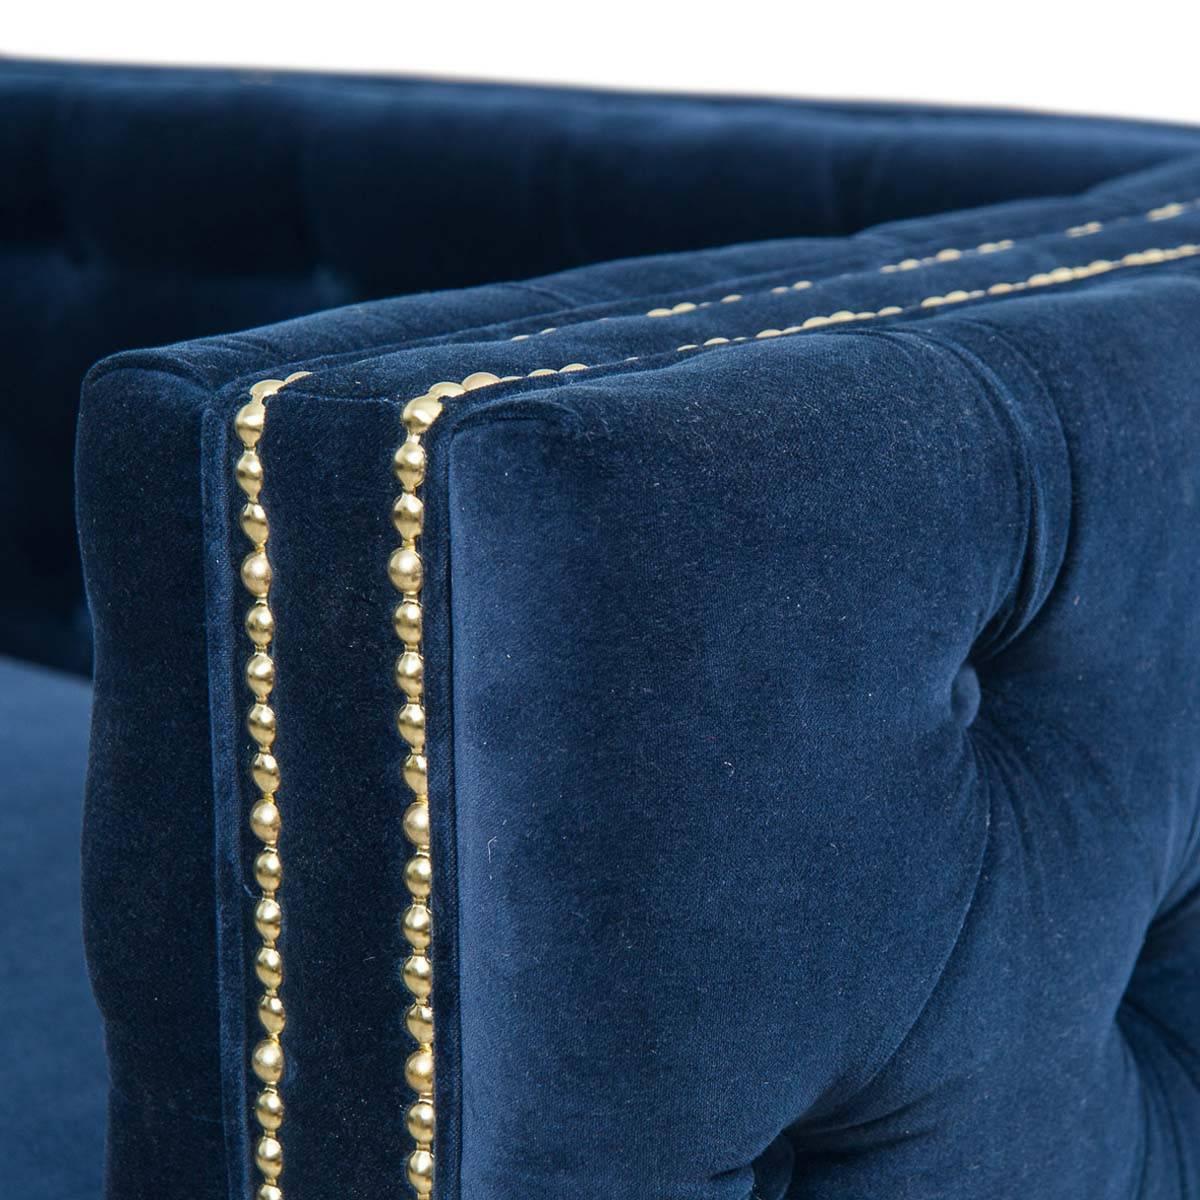 The inside out sectional features button tufting on the interior and outer sides with a flat back. With regal navy velvet, brass nailhead detailing and 7